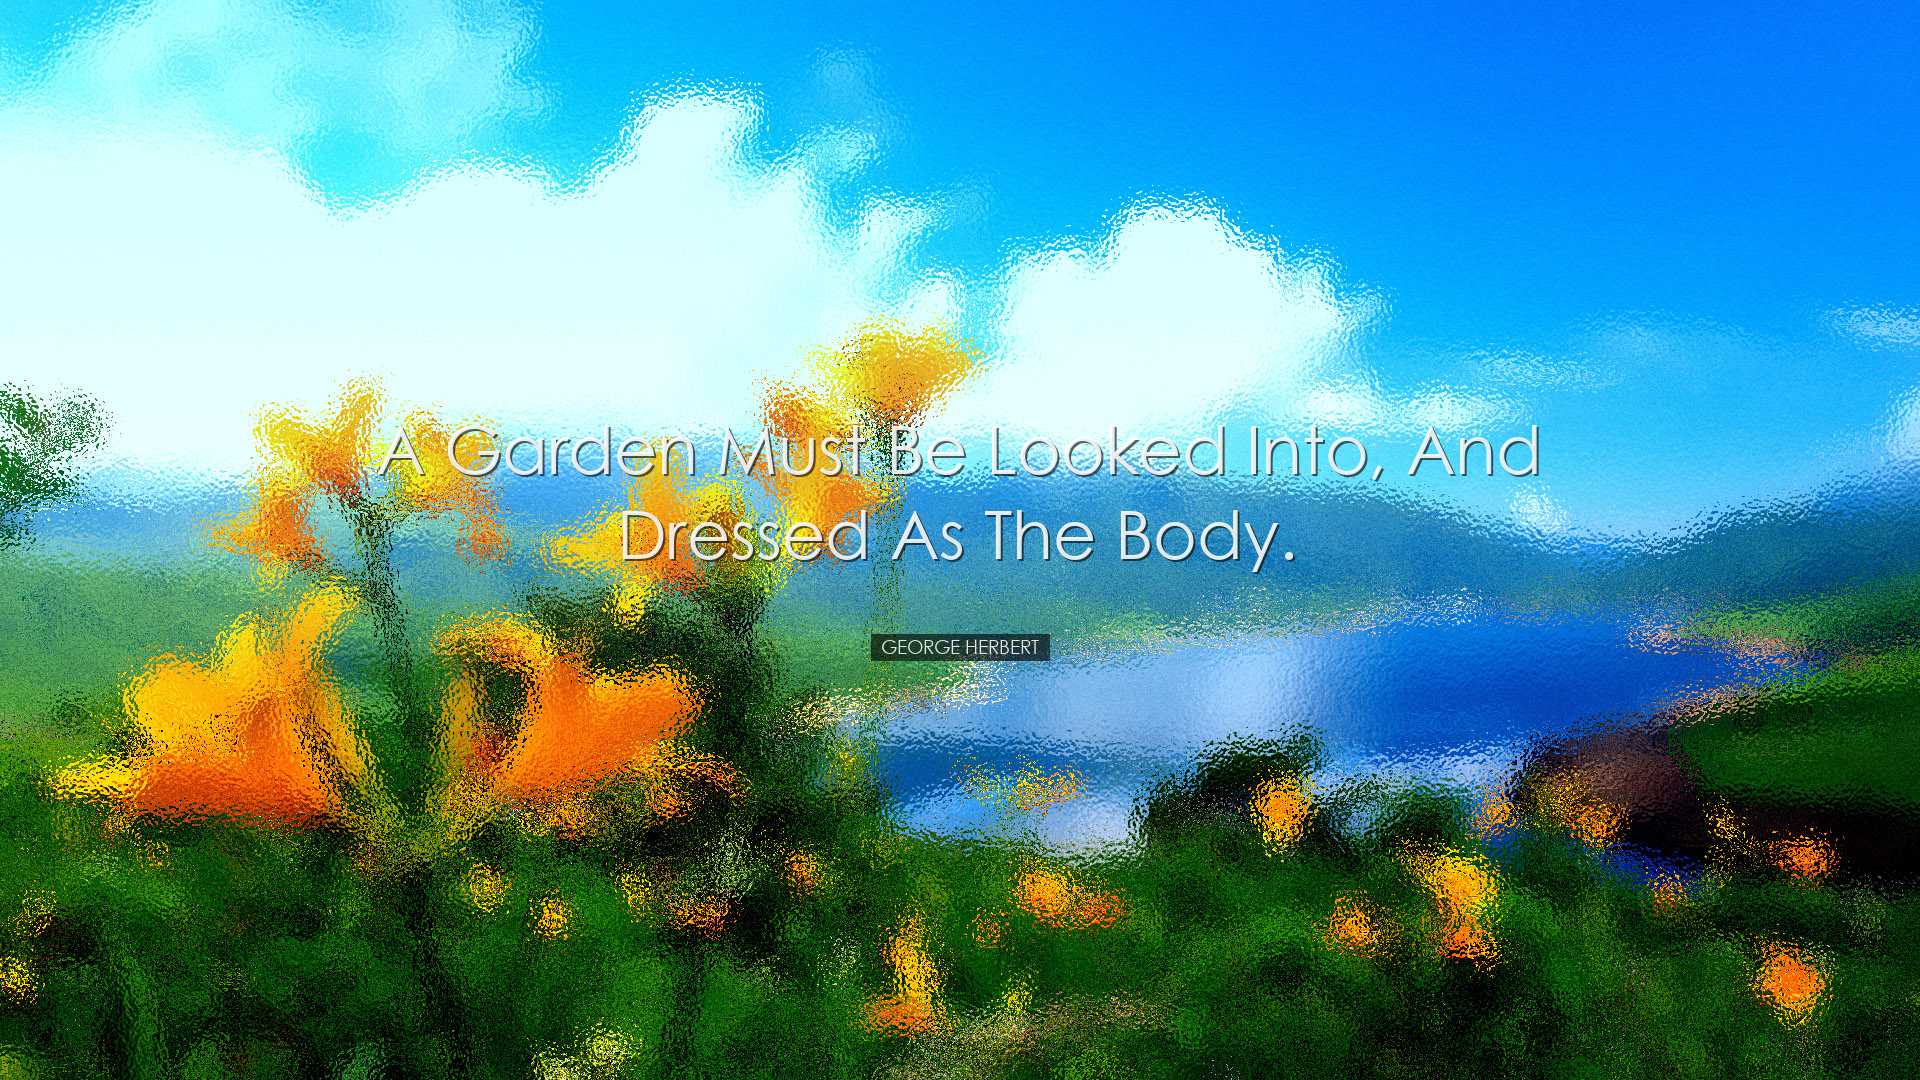 A garden must be looked into, and dressed as the body. - George He